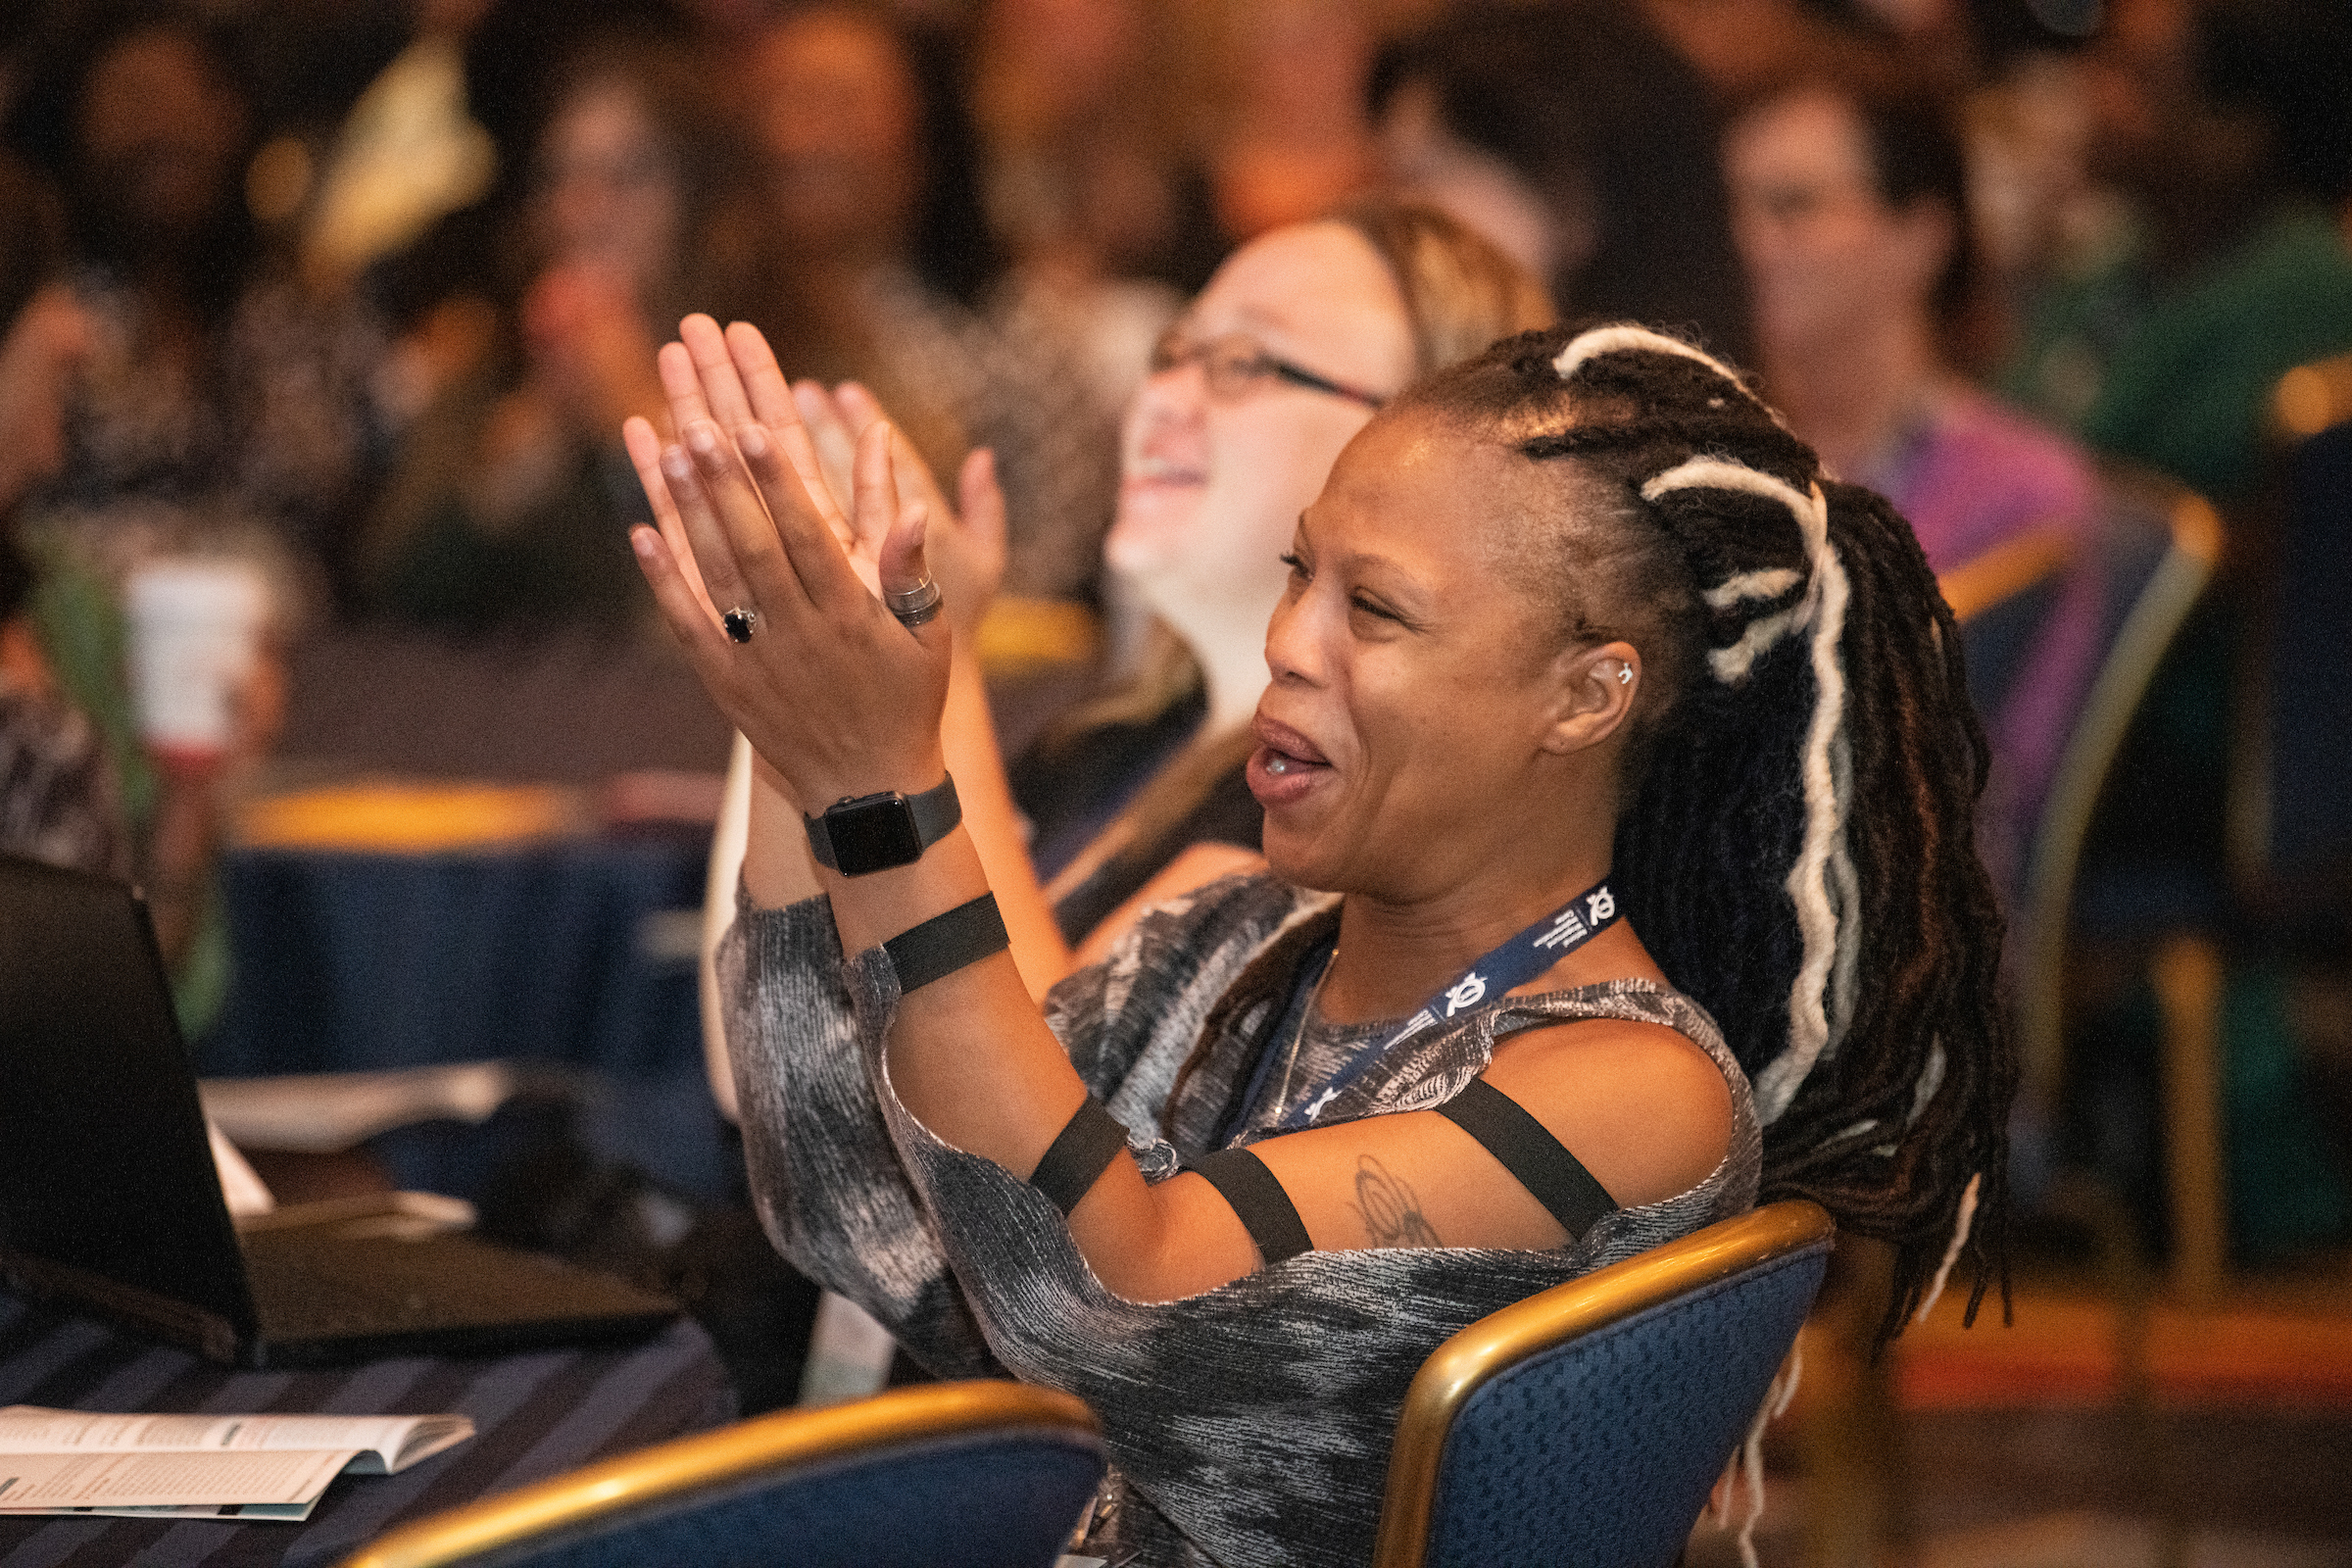 a woman smiling and applauding sitting at a conference